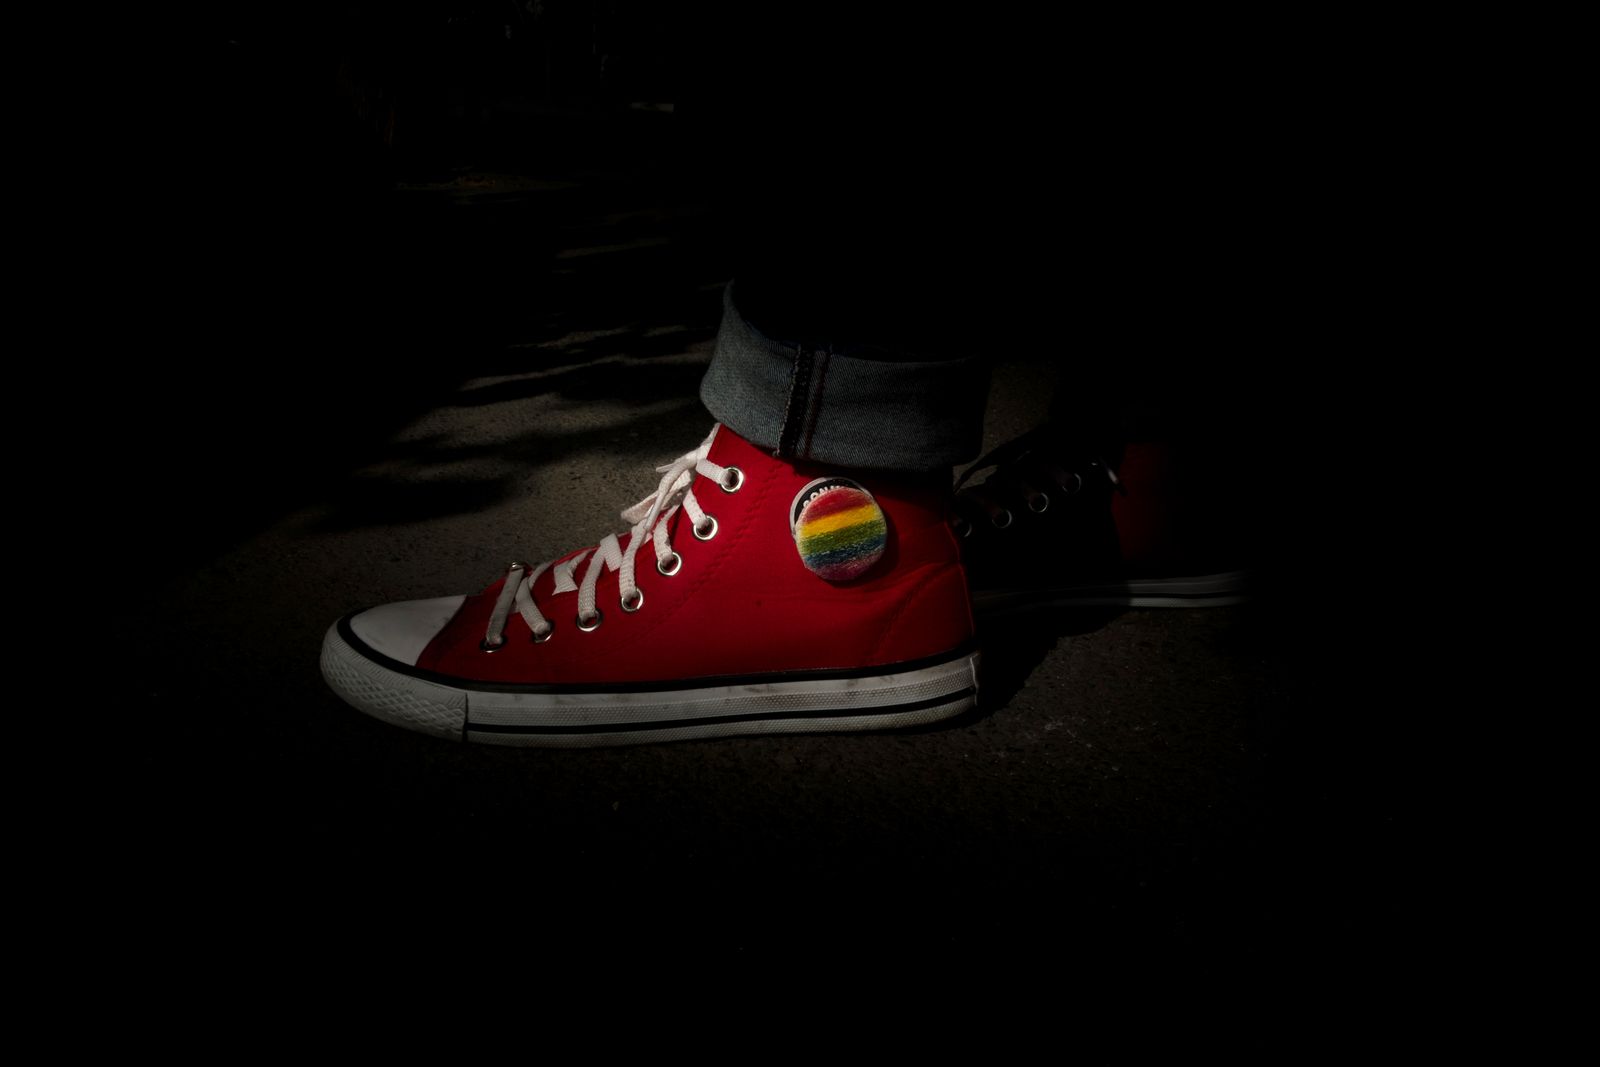 © URA ITURRALDE - Ari has the colours of the LGBT flag stitched onto his shoes.